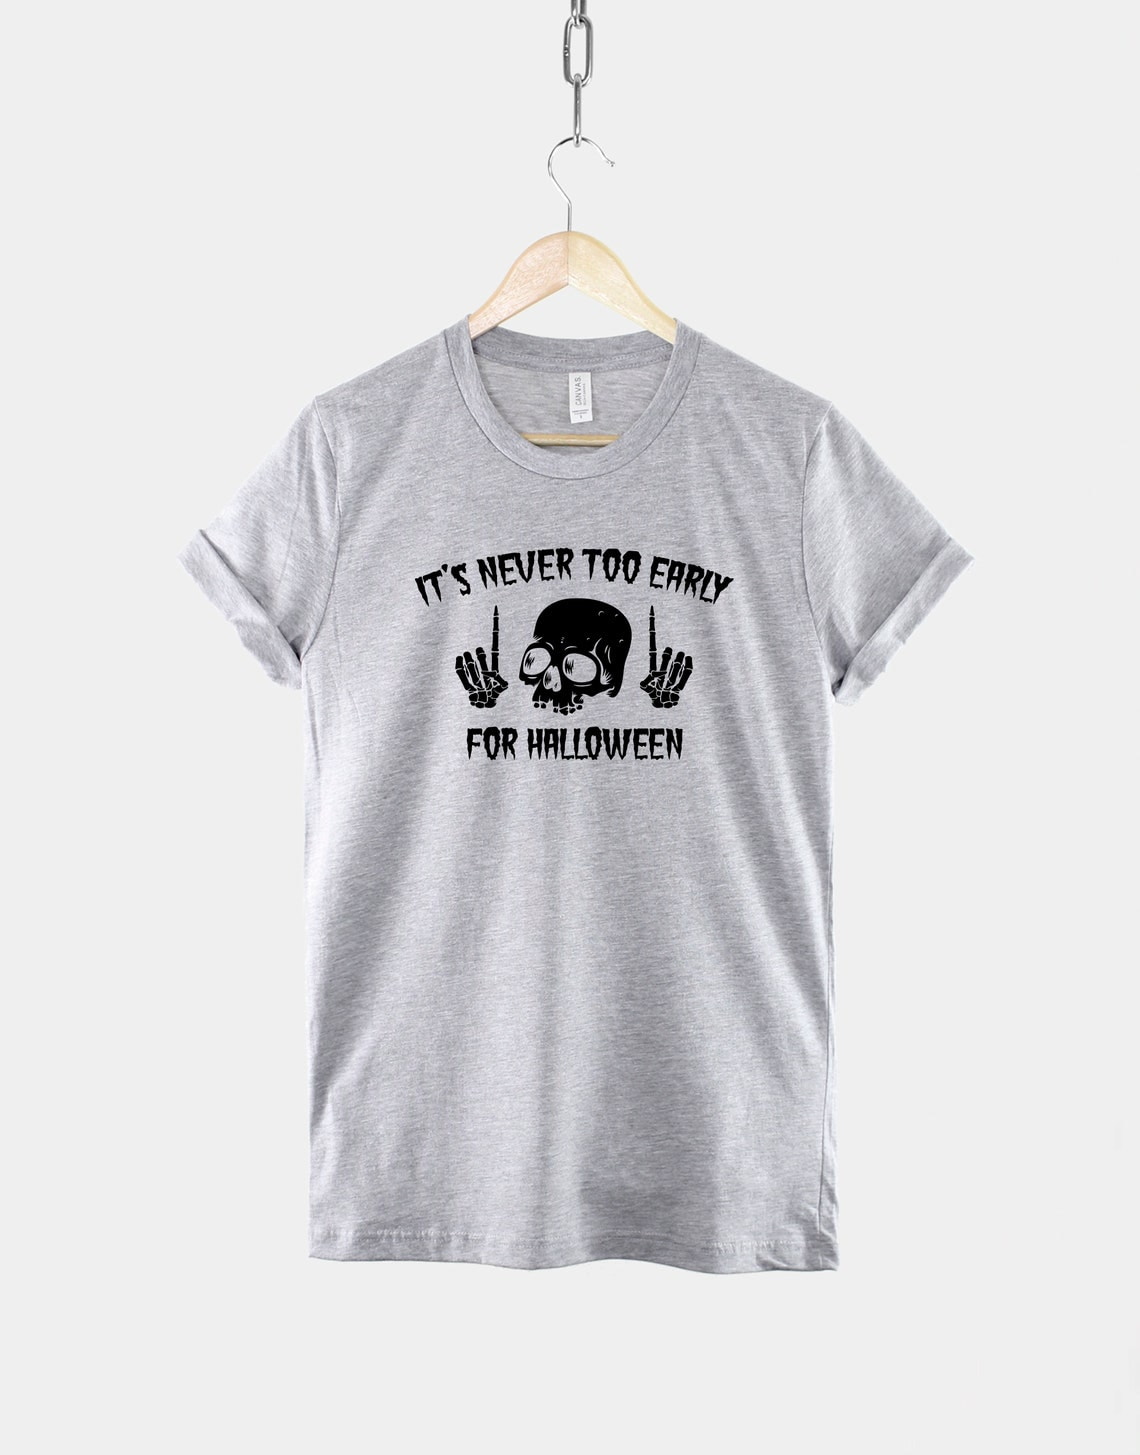 Skull Halloween Shirt - It's Never Too Early For Halloween - Goth Halloween T-Shirt